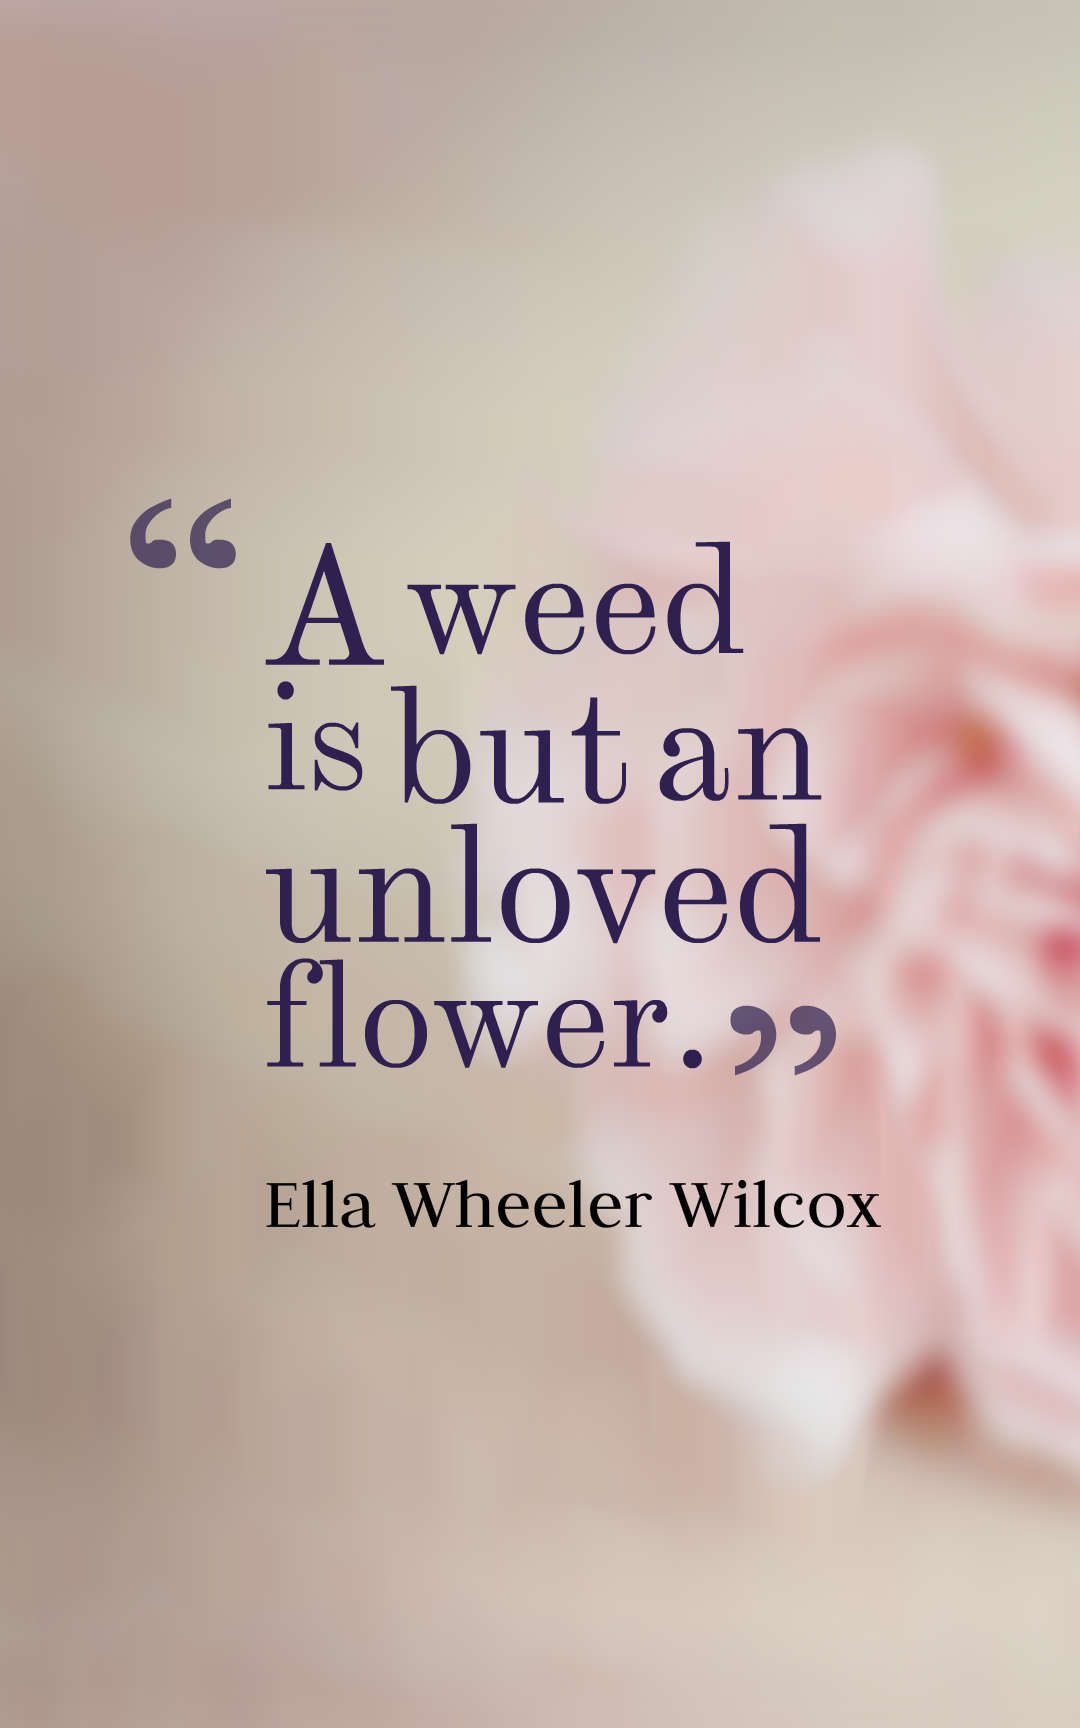 A weed is but an unloved flower.